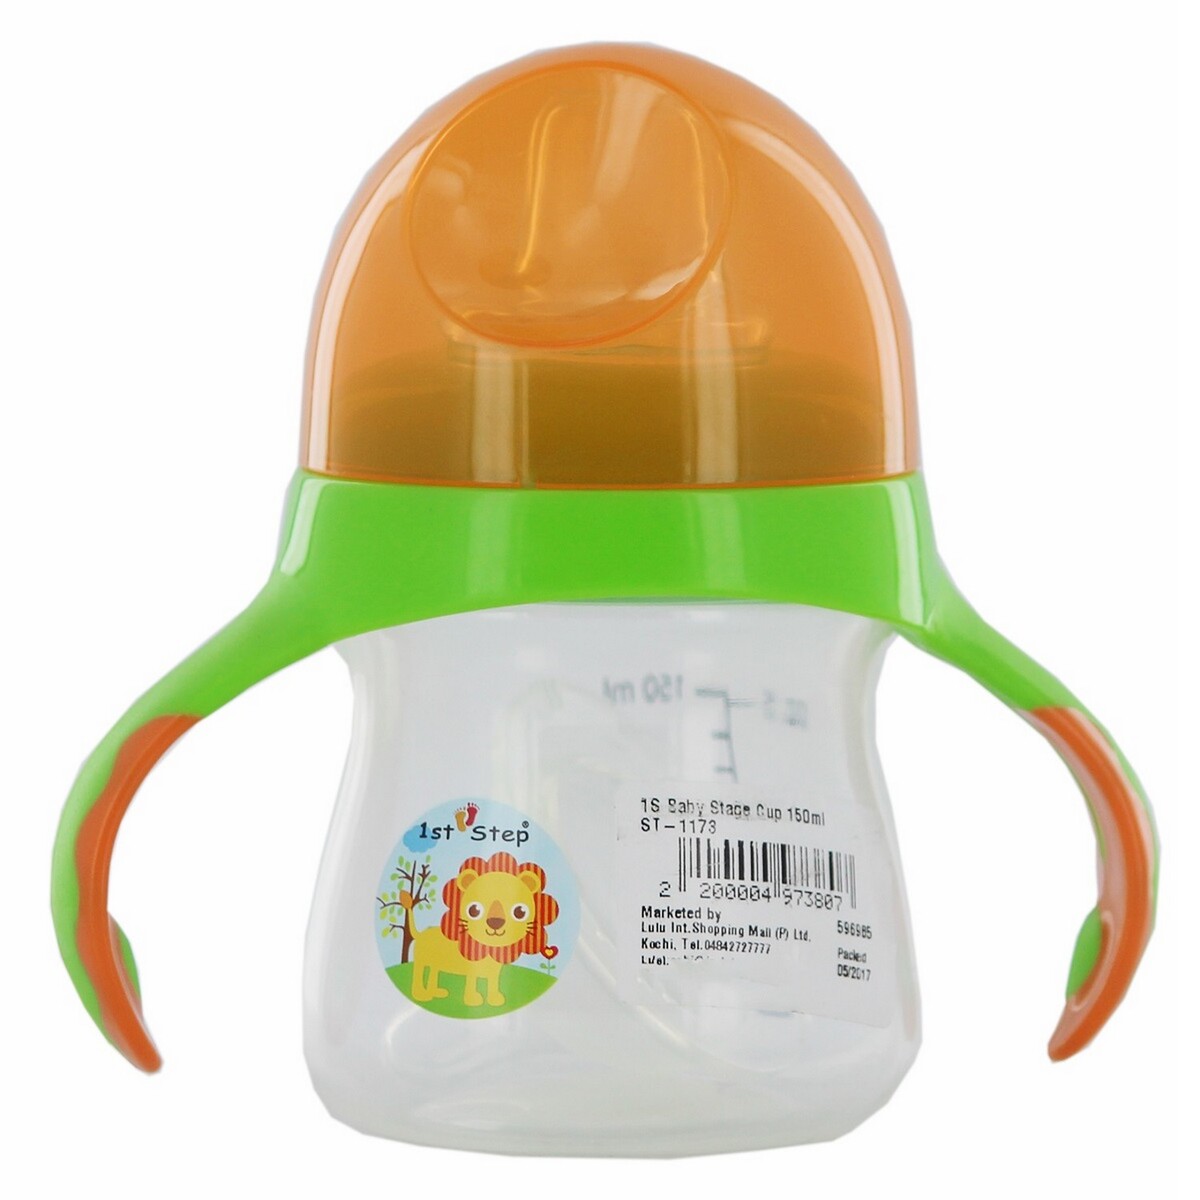 1st Step Baby Stage Cup Bottle ST-1173 150ml